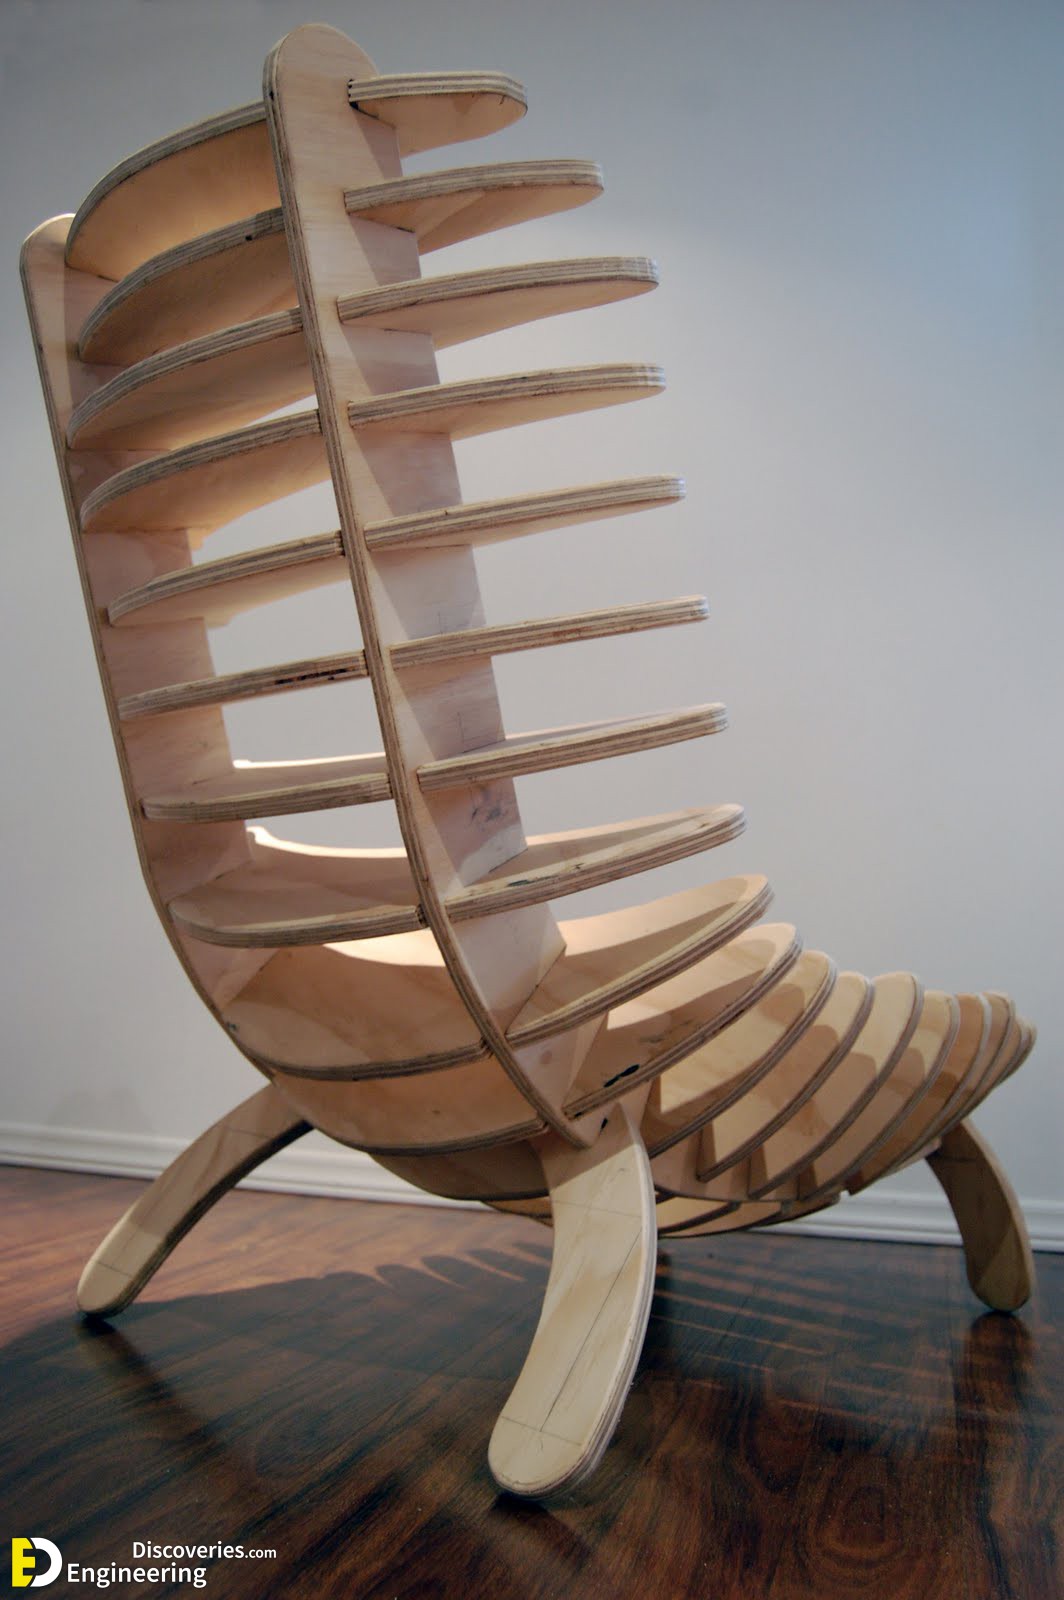 https://engineeringdiscoveries.com/1-engineering-discoveries-unique-chair-design-ideas-for-2023/